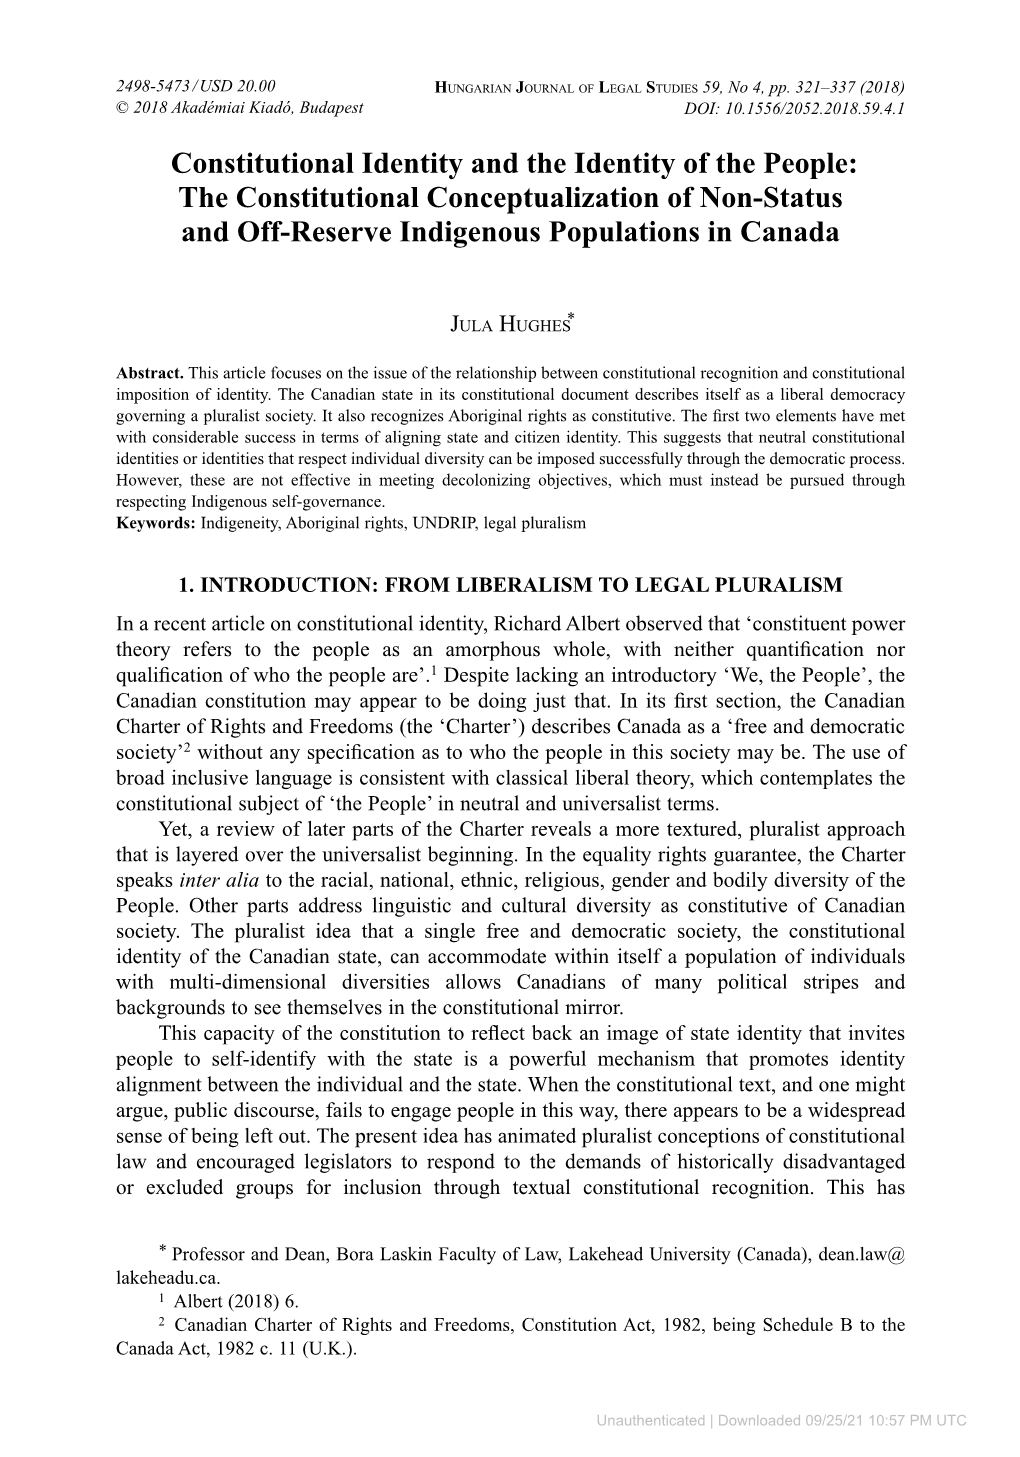 Constitutional Identity and the Identity of the People: the Constitutional Conceptualization of Non-Status and Off-Reserve Indigenous Populations in Canada